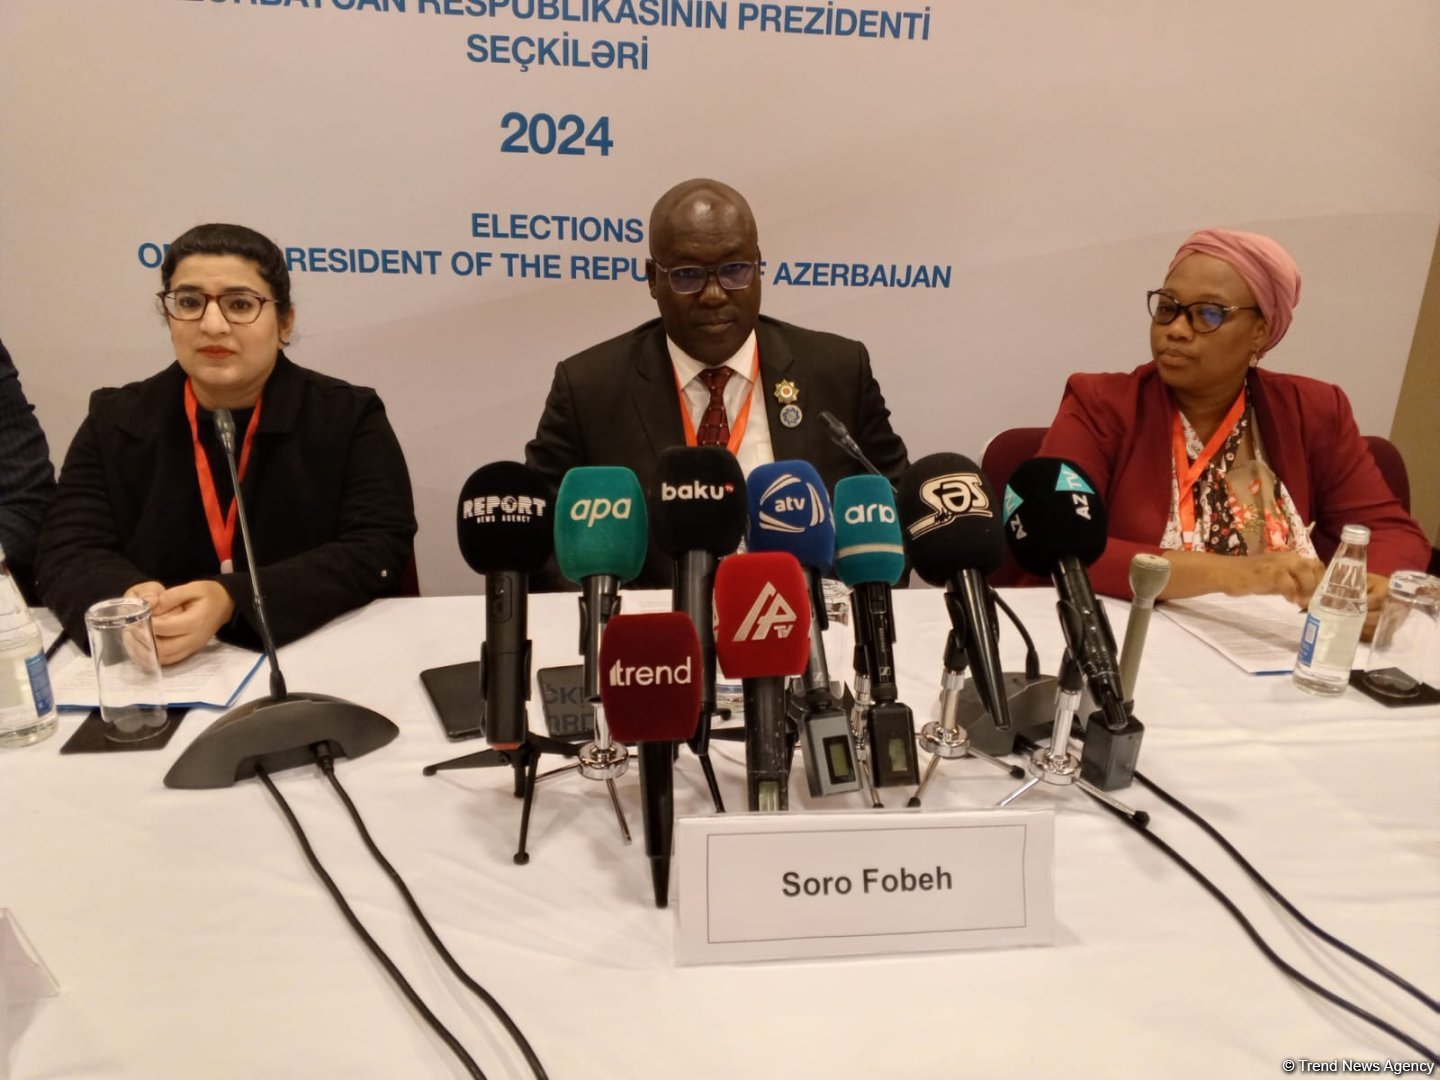 All terms created for disabled citizens in Azerbaijan's presidential election - IPC member